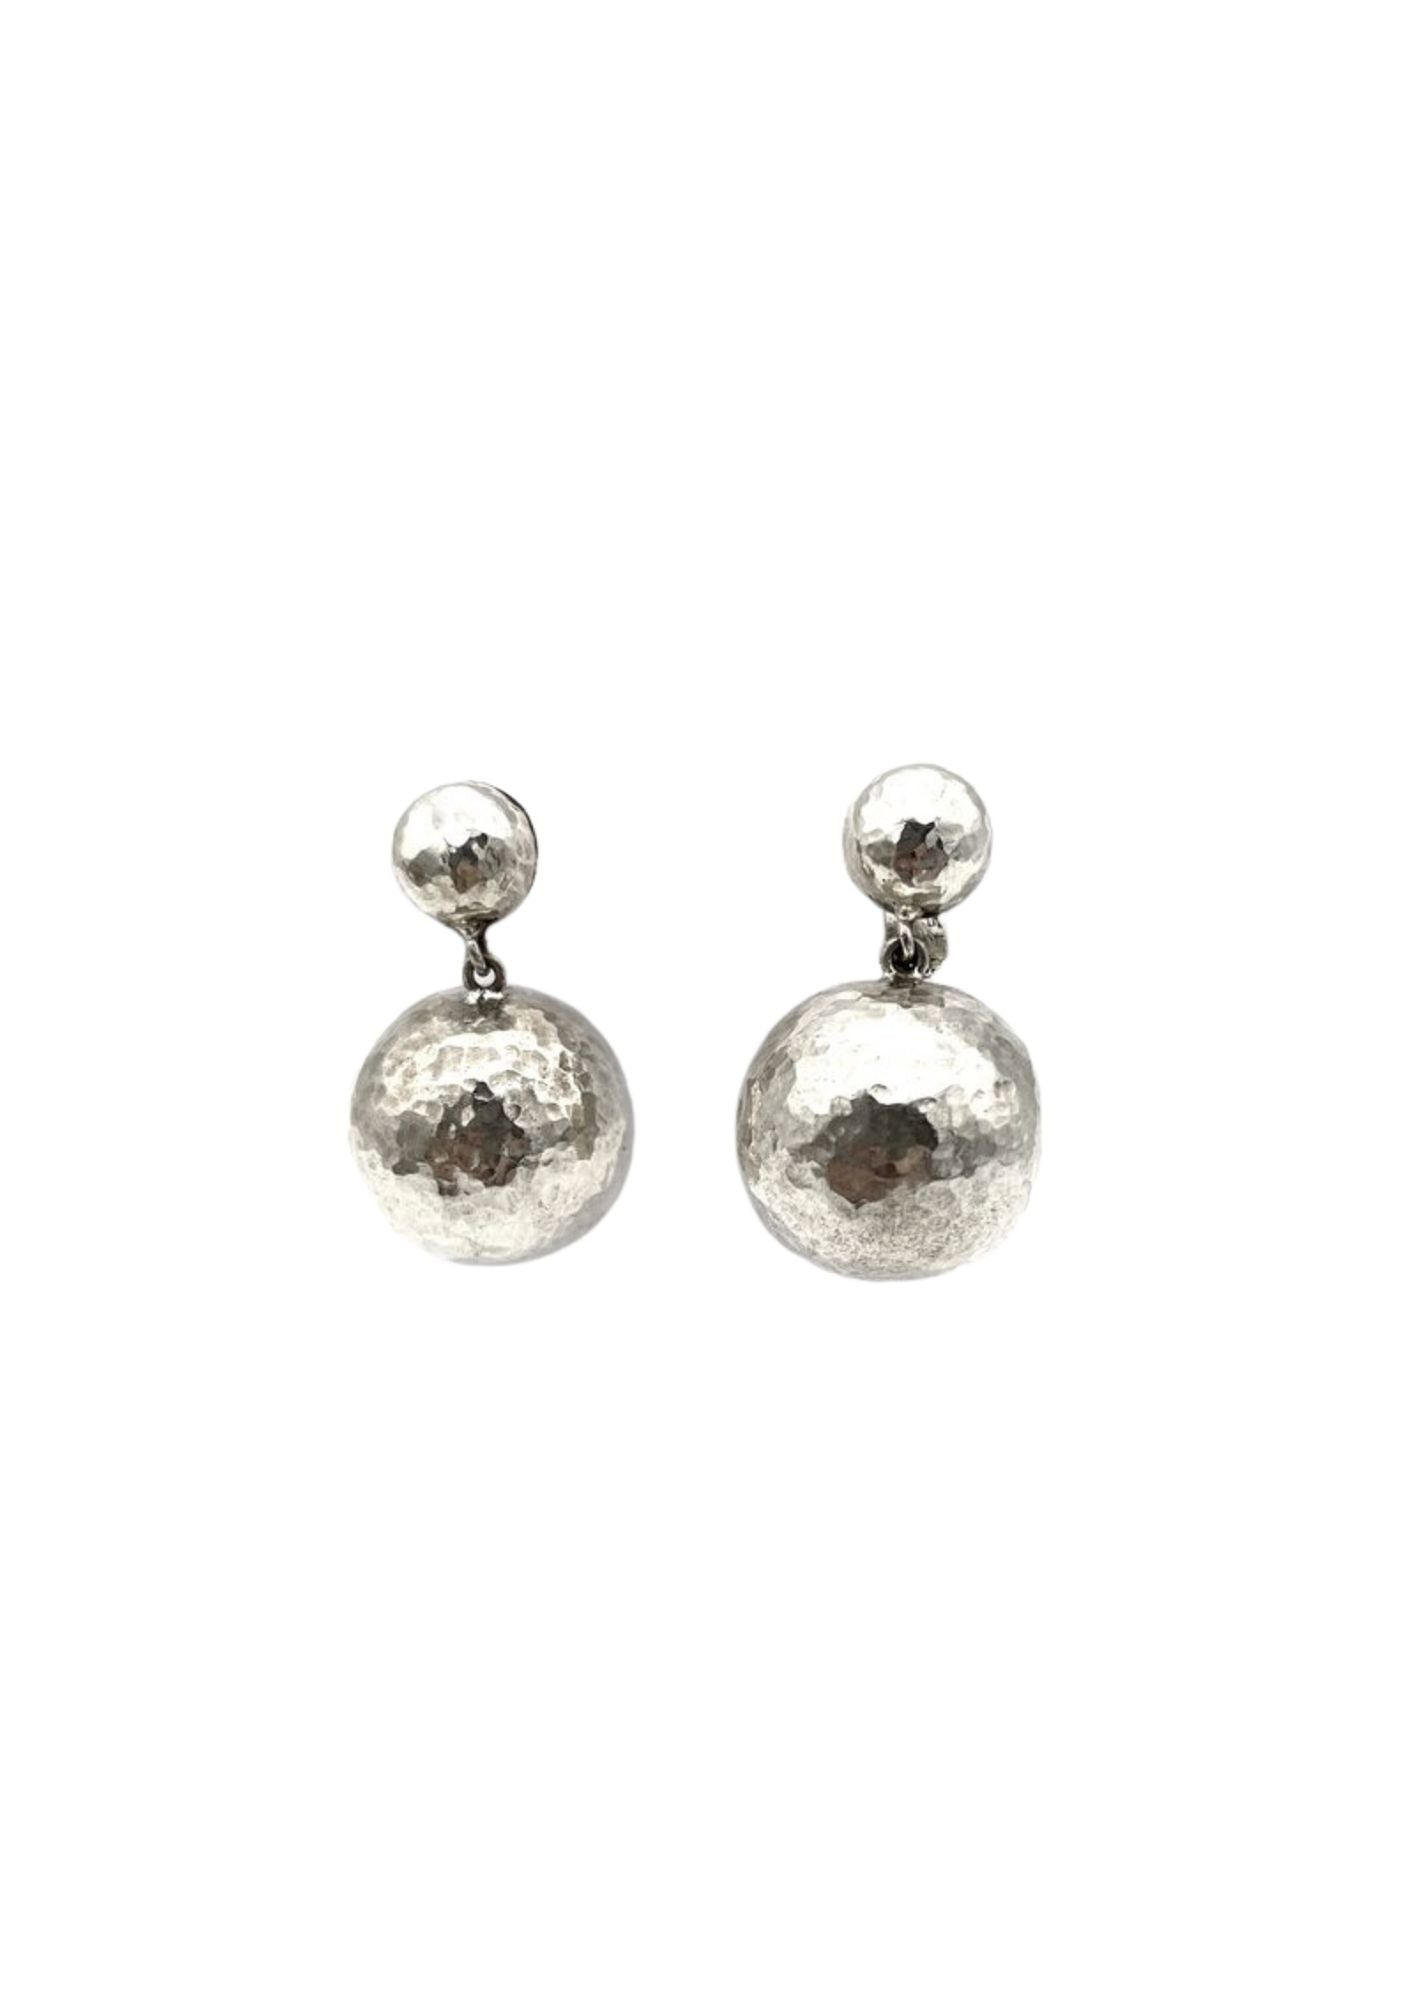 Pat Areias Sterling Silver Hammered Ball Earrings E926